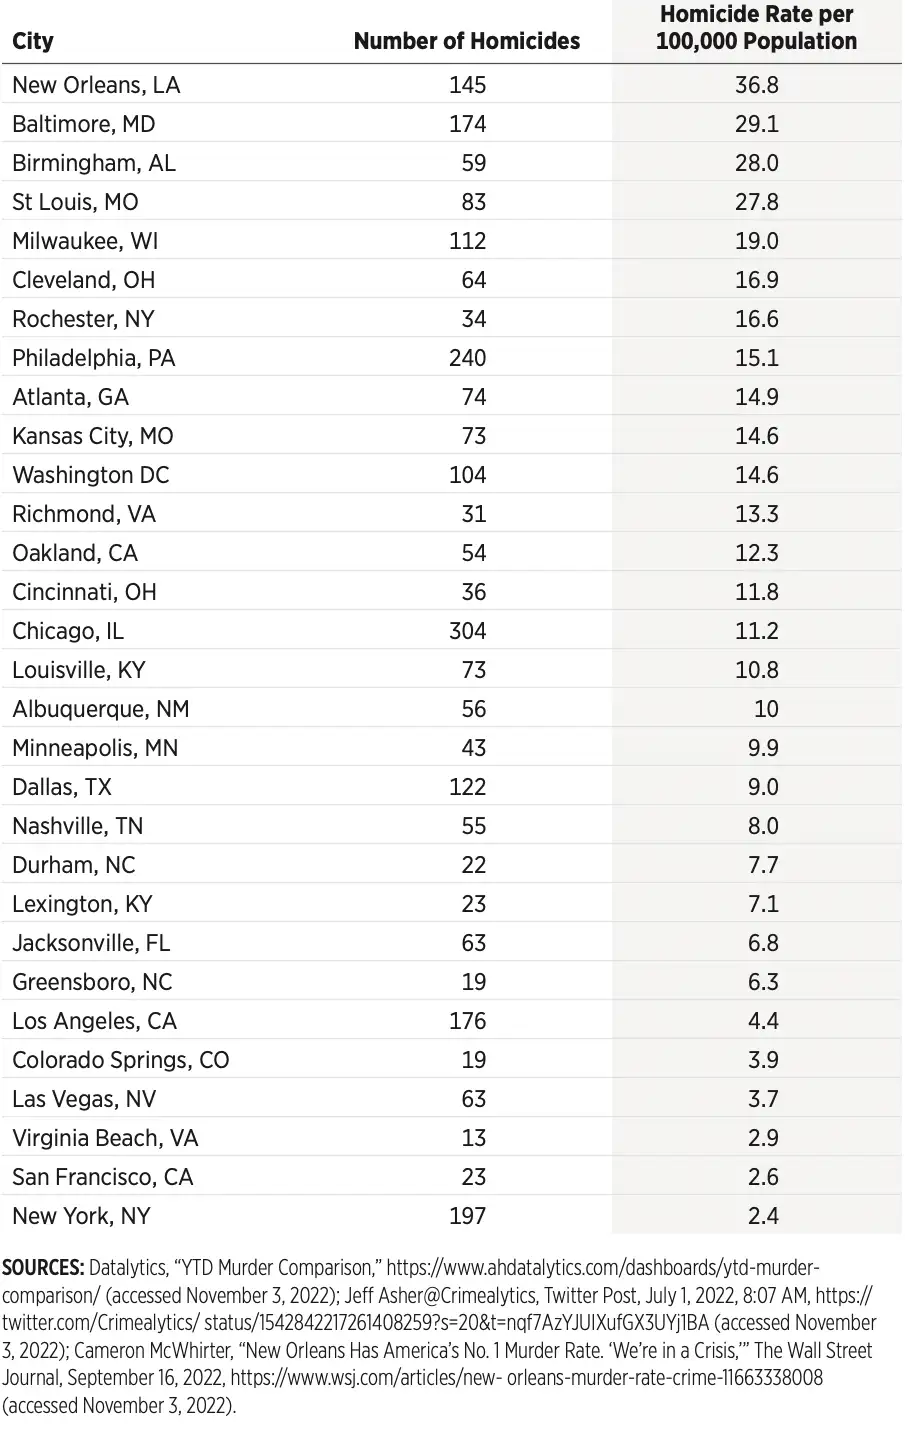 Most Dangerous Cities In The United States In 2022: Ranking